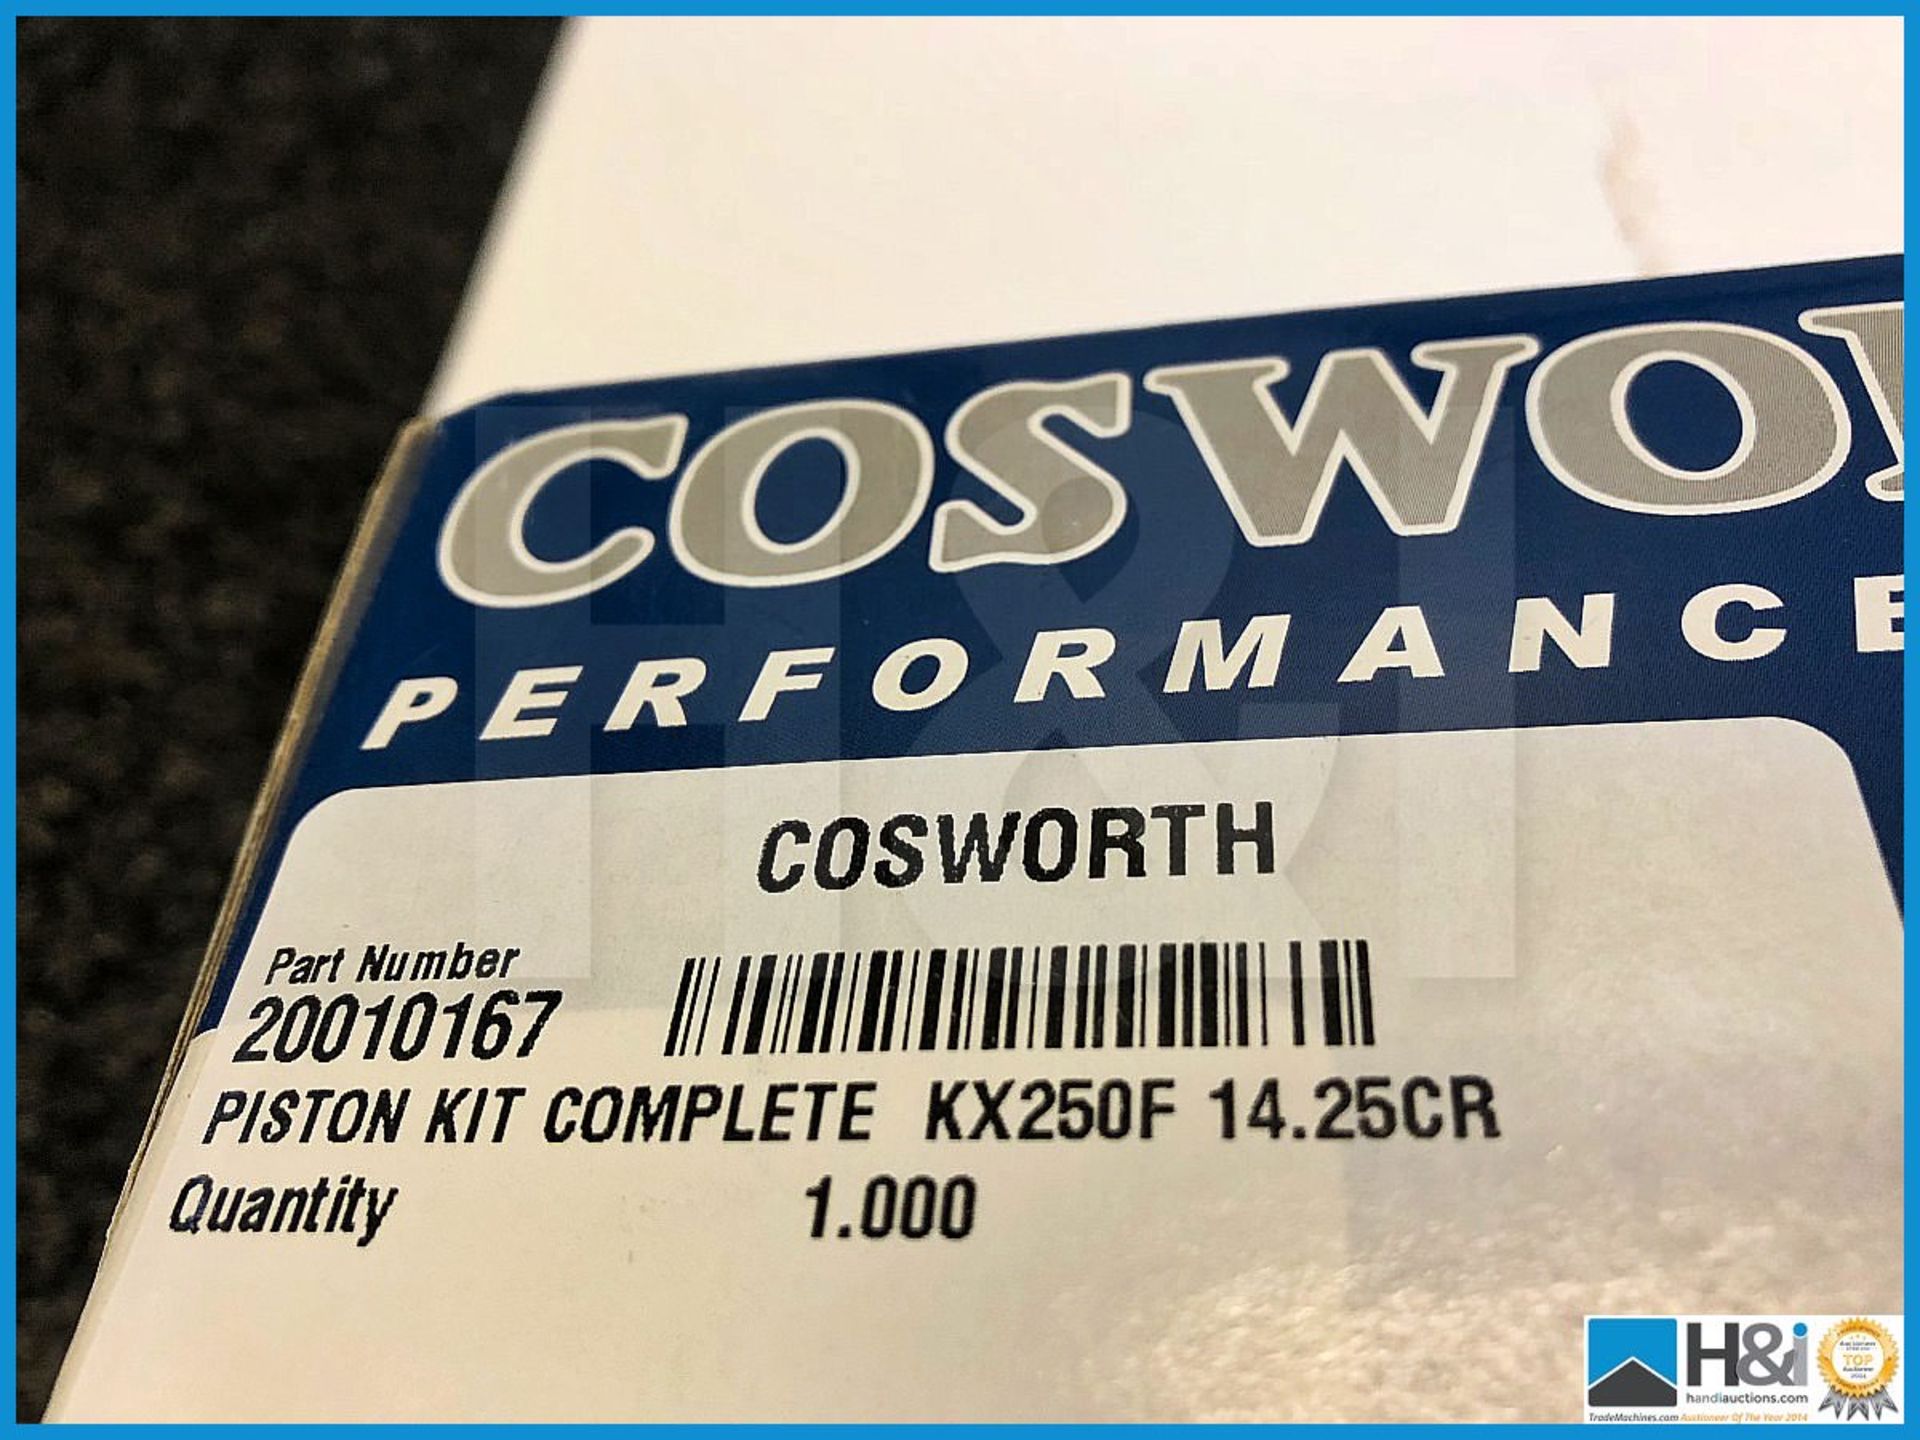 12 x Cosworth Piston Kit Complete KX250F 14.25CR. Code 20010167. Lot 81. RRP GBP 1148 - Image 5 of 5